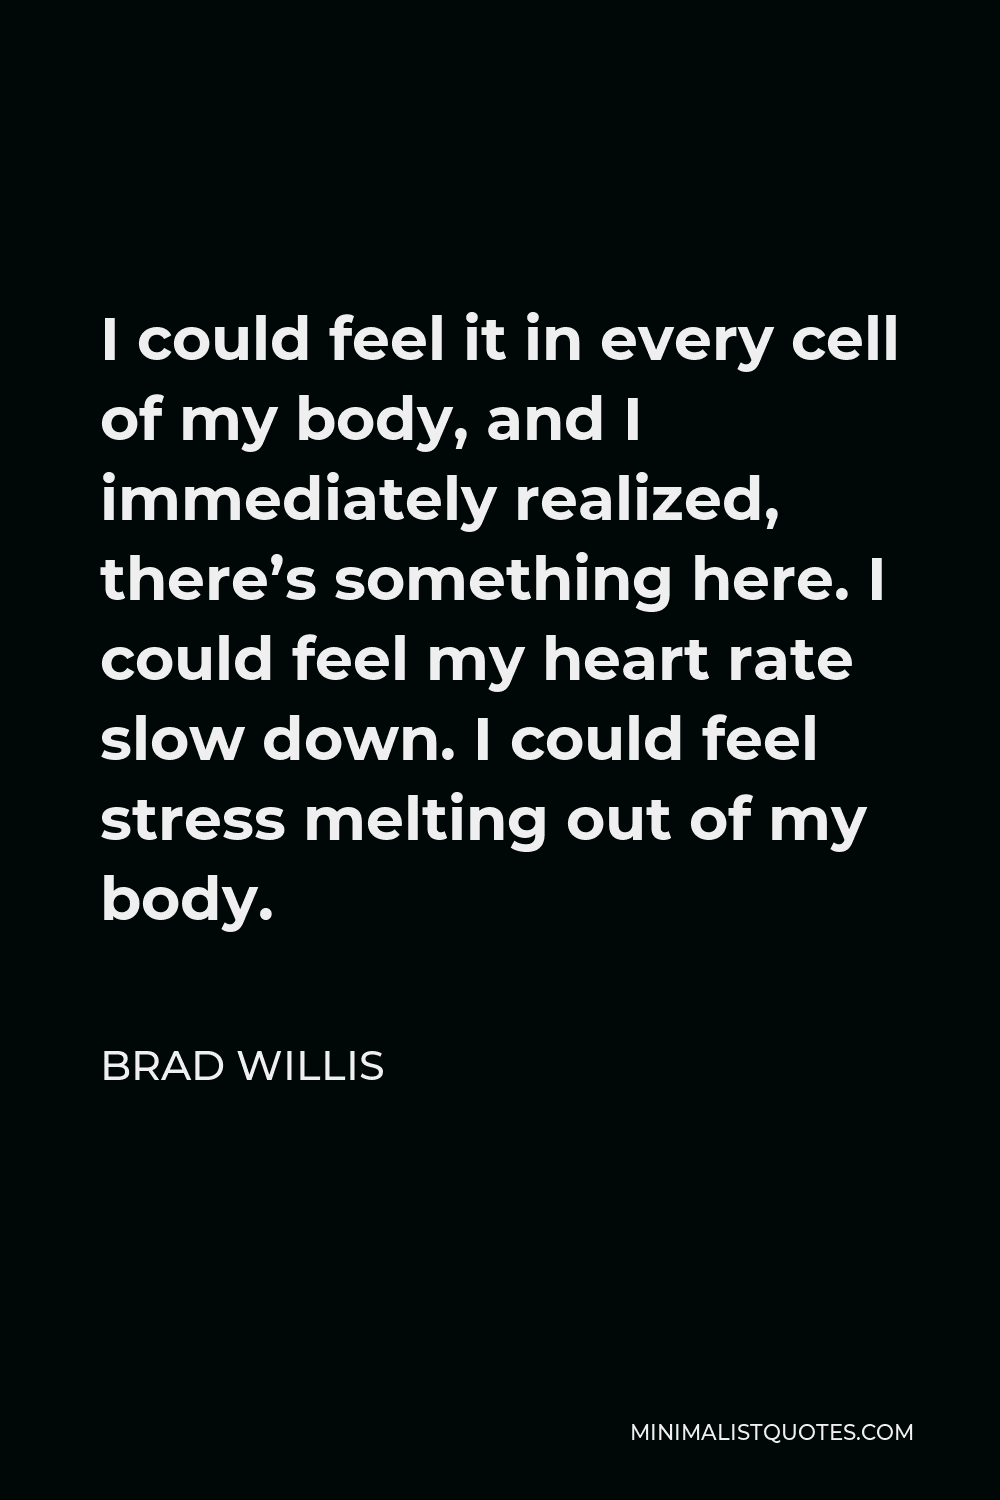 Brad Willis Quote - I could feel it in every cell of my body, and I immediately realized, there’s something here. I could feel my heart rate slow down. I could feel stress melting out of my body.